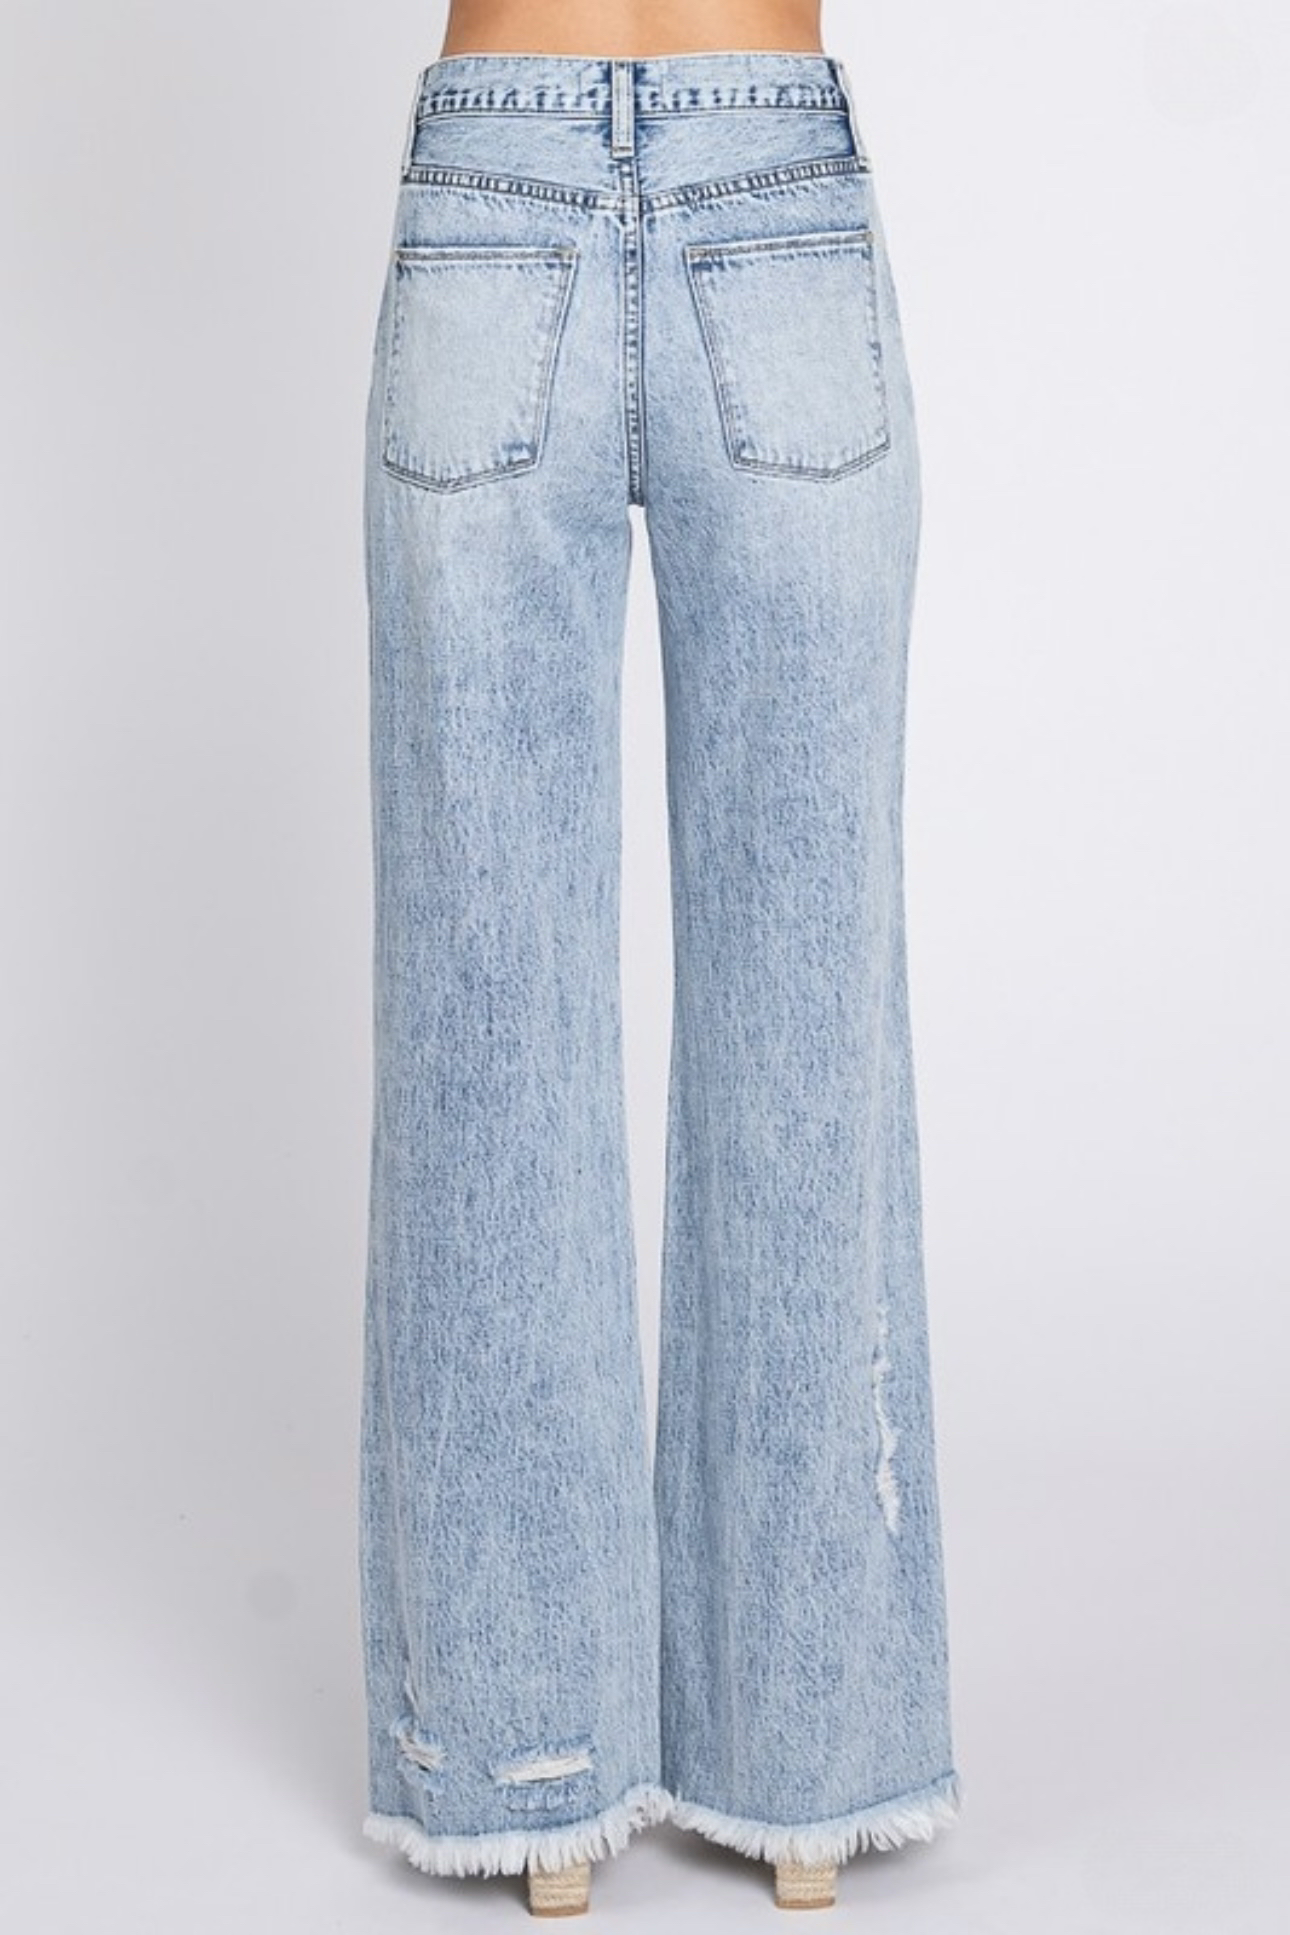 FeTcH FLaRe JeAnS